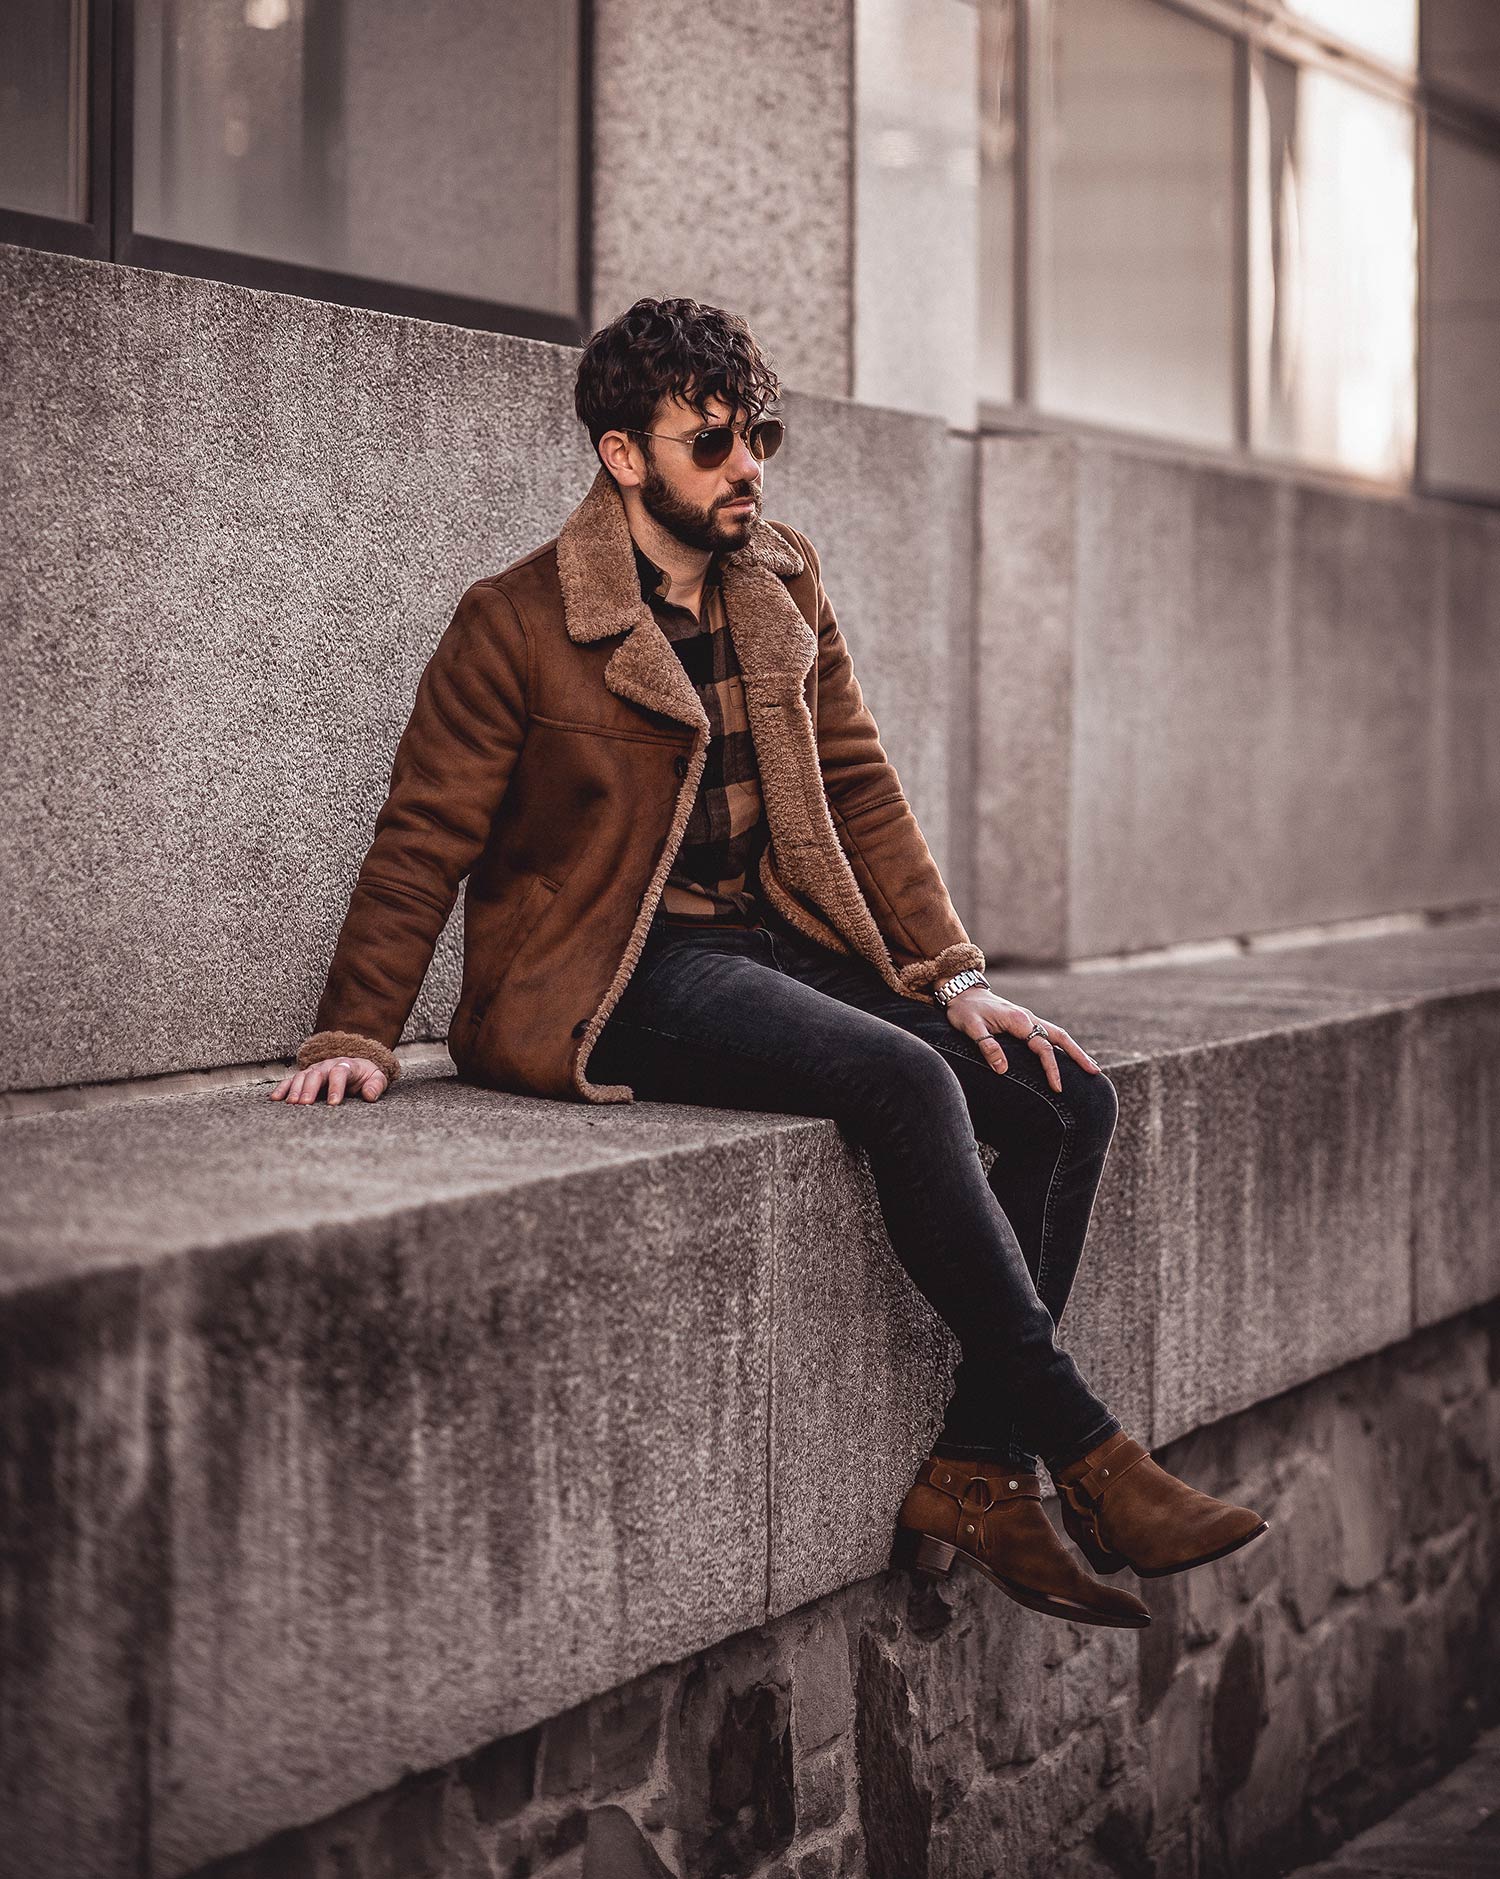 Brown And Black Vintage Style Outfit - Your Average Guy